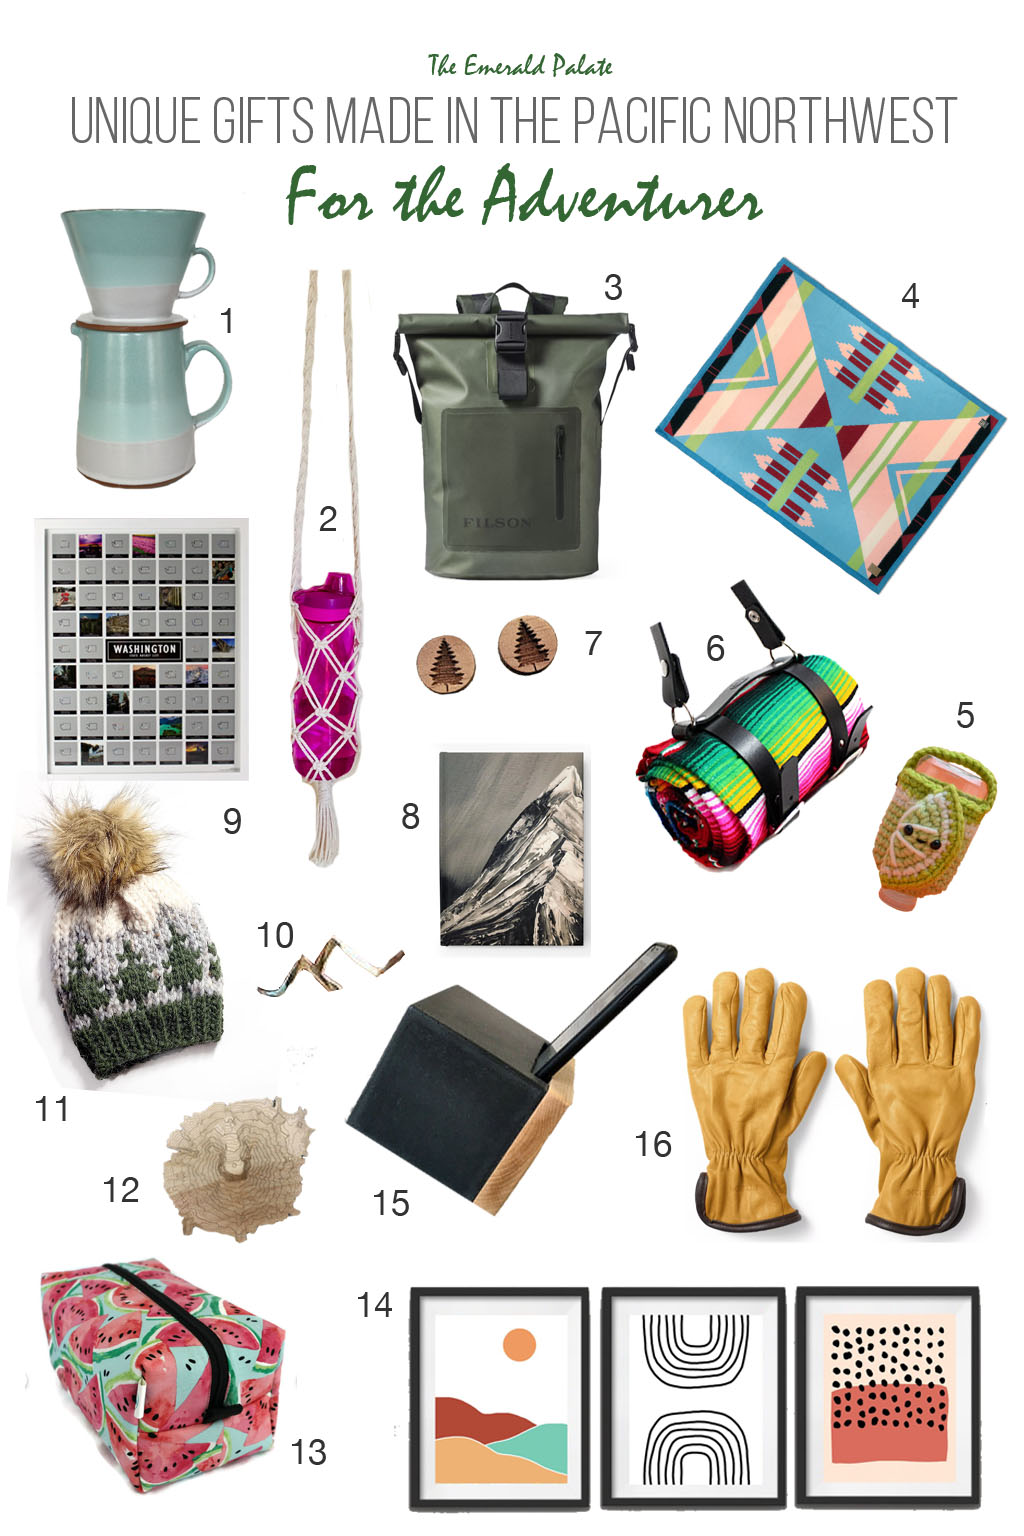 A collection of Pacific Northwest gifts for adventurers